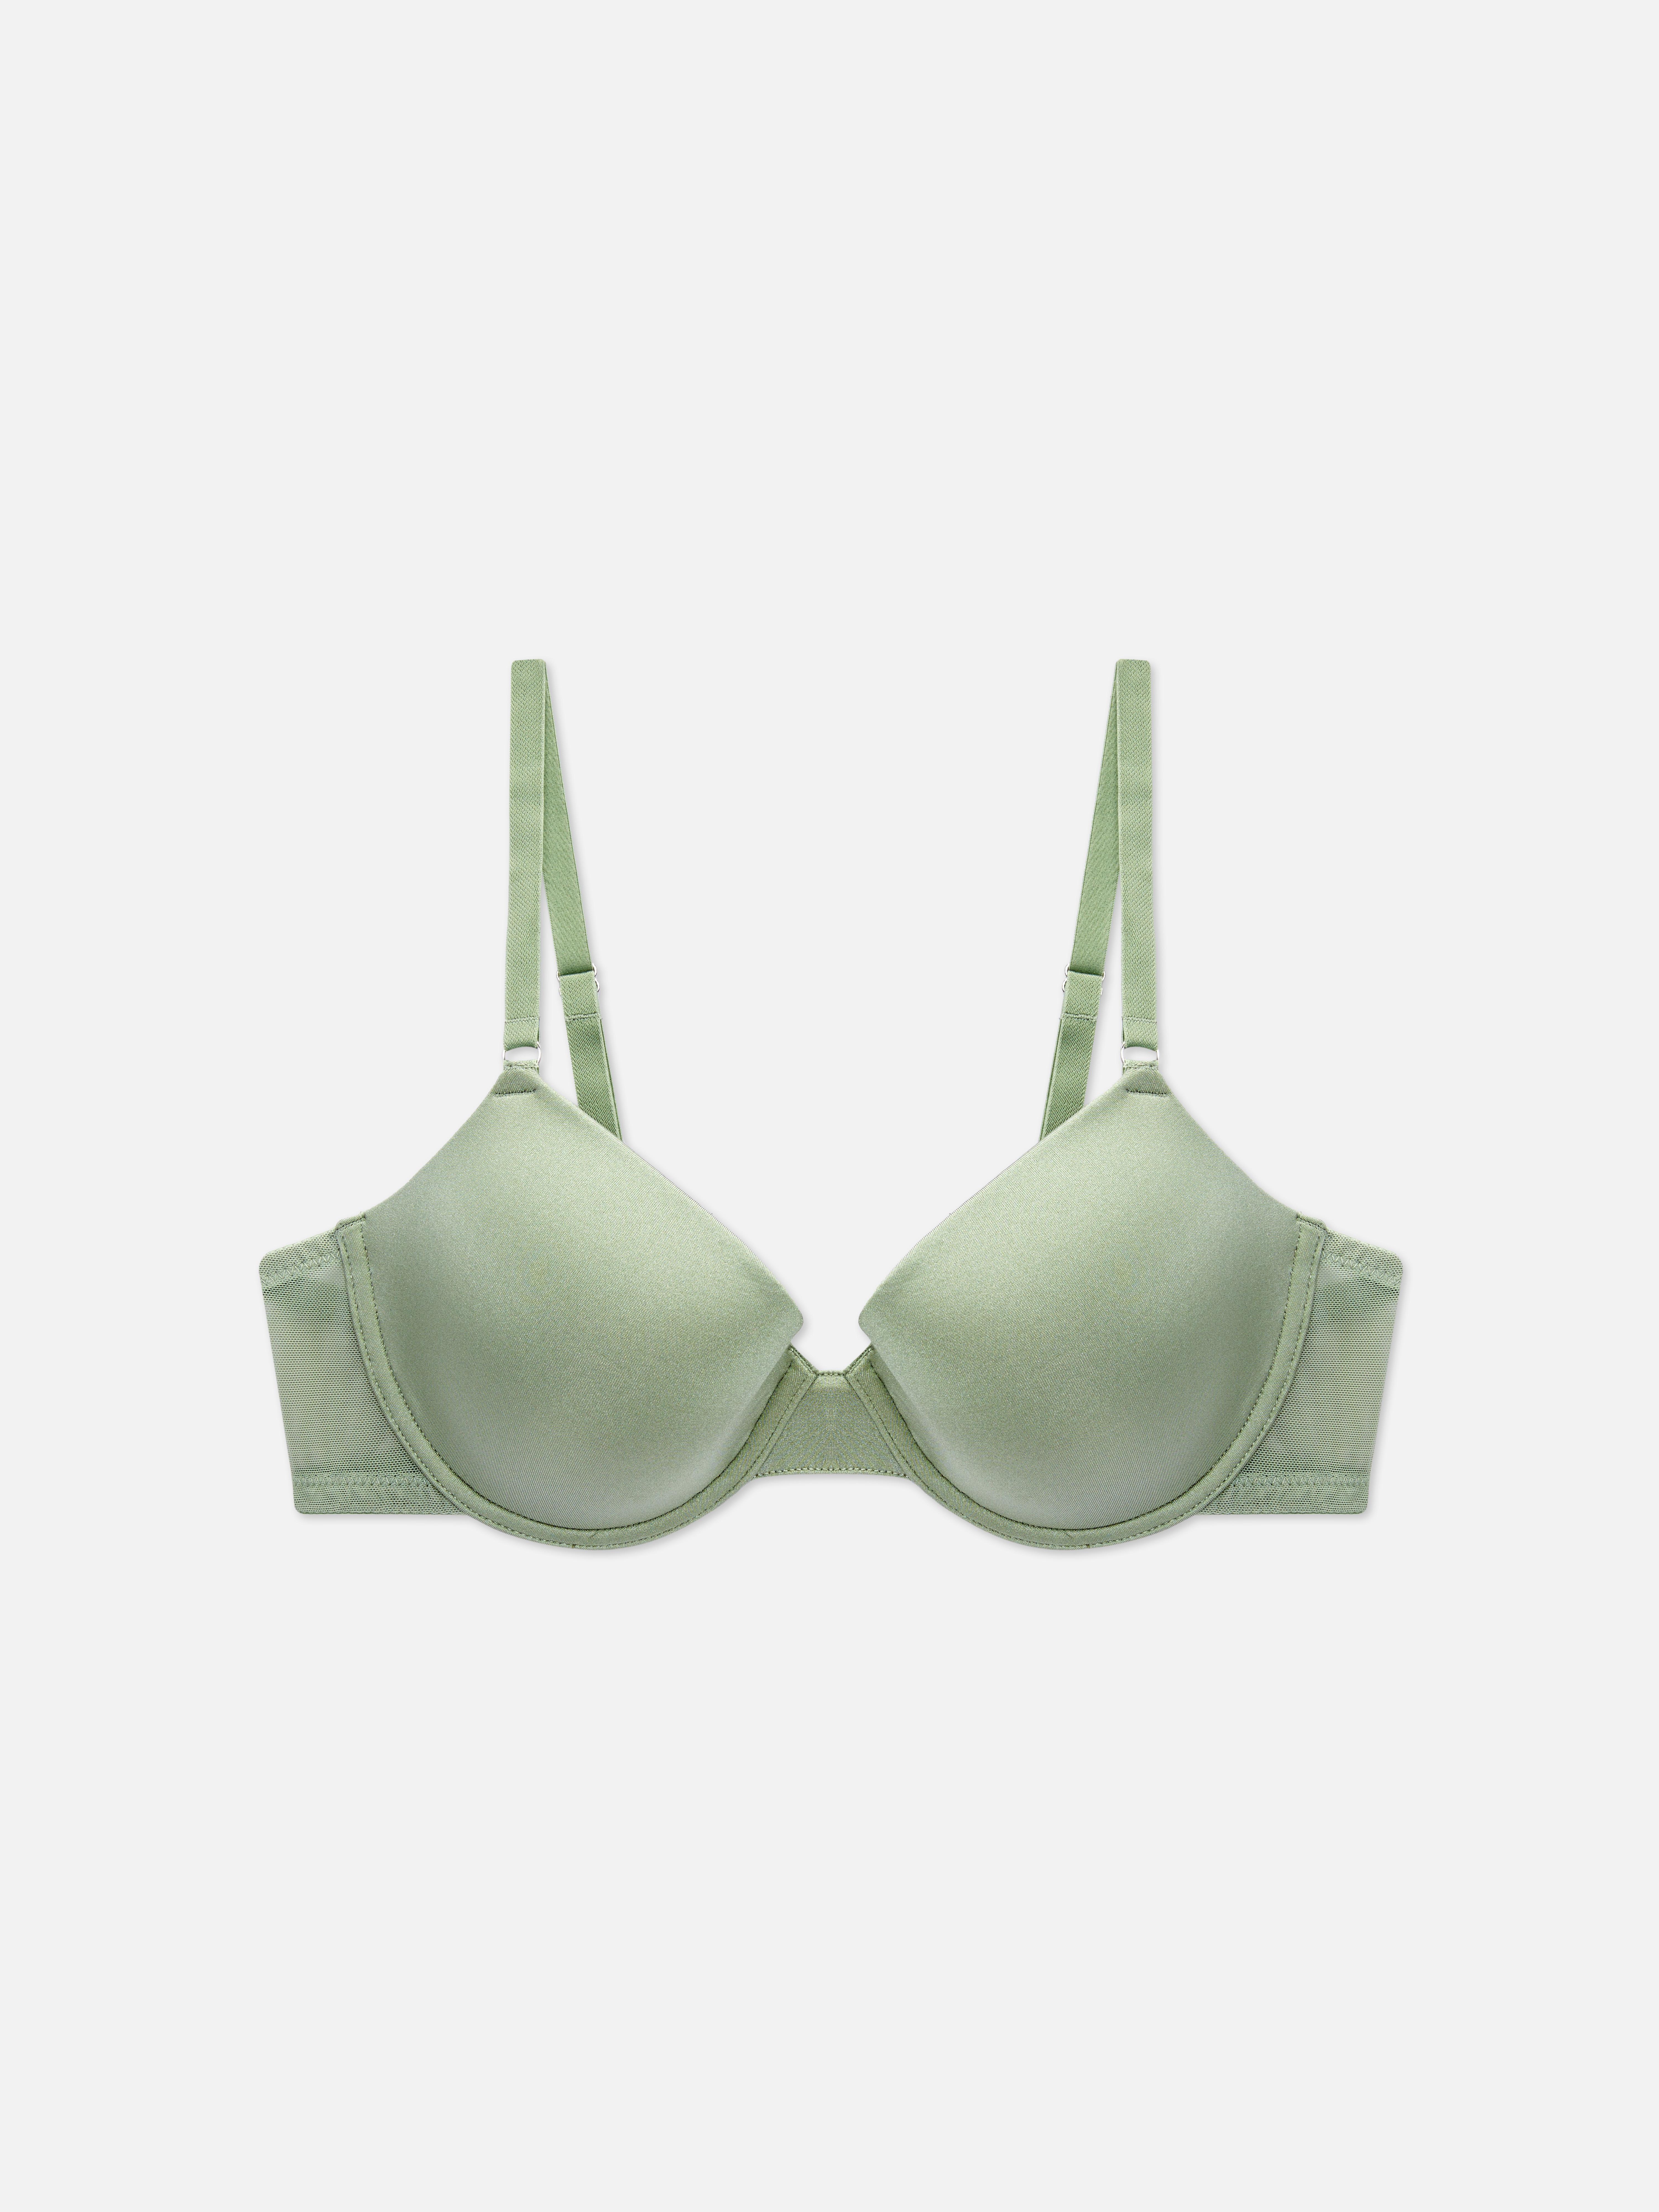 PRIMARK T-SHIRT BRA FOR THAT EVERYDAY FEELING NEW IMPROVED FIT